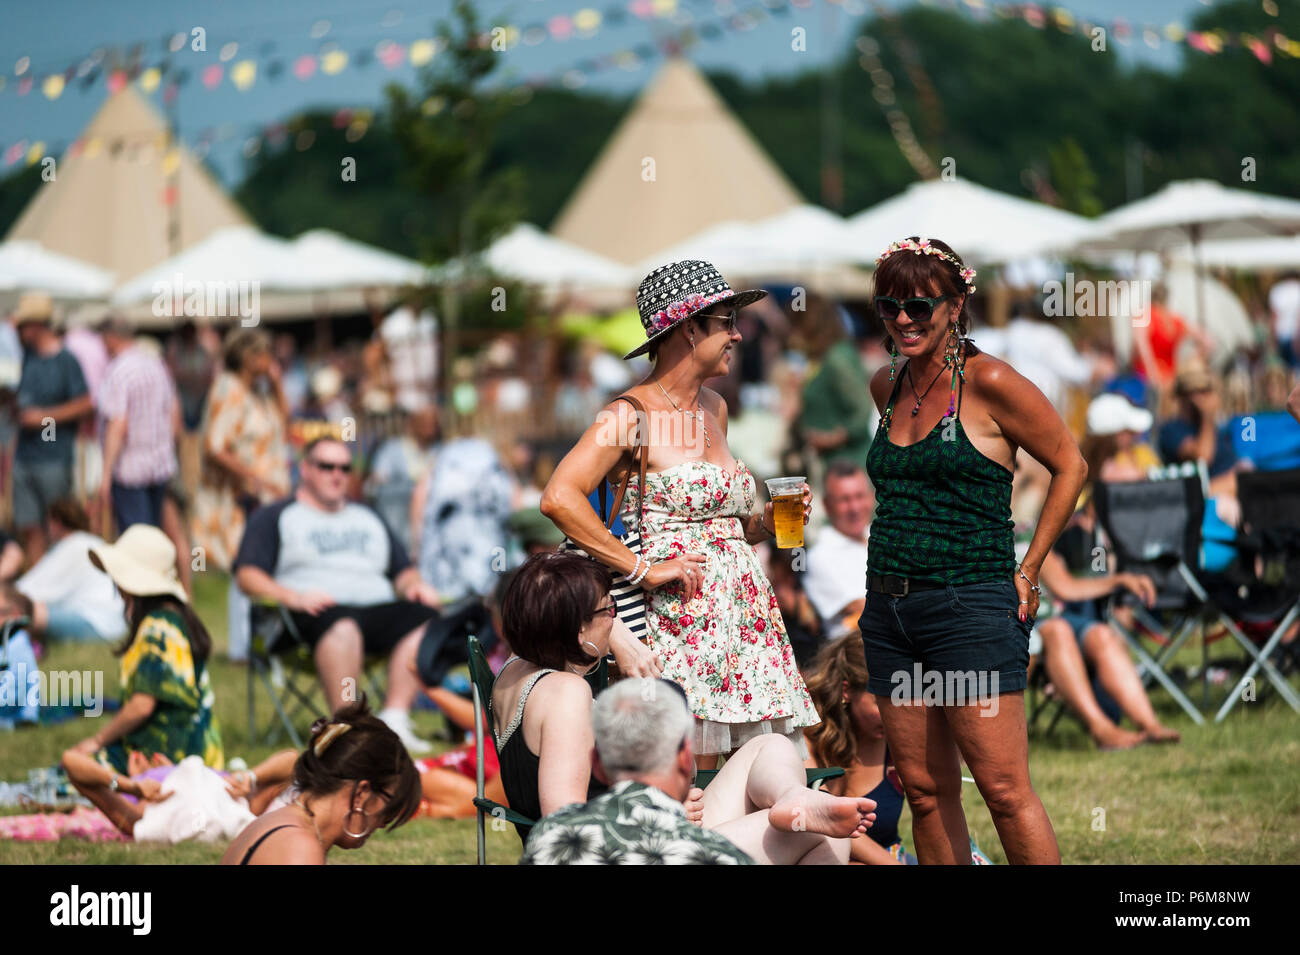 Glynde, East Sussex, 1st July 2018. Festival goers enjoy another scorching hot and humid day at Glynde Place, in the picturesque setting of the South Downs, for the final day of Love Supreme’s sixth consecutive festival. Credit: Francesca Moore/Alamy Live Newscolo Stock Photo